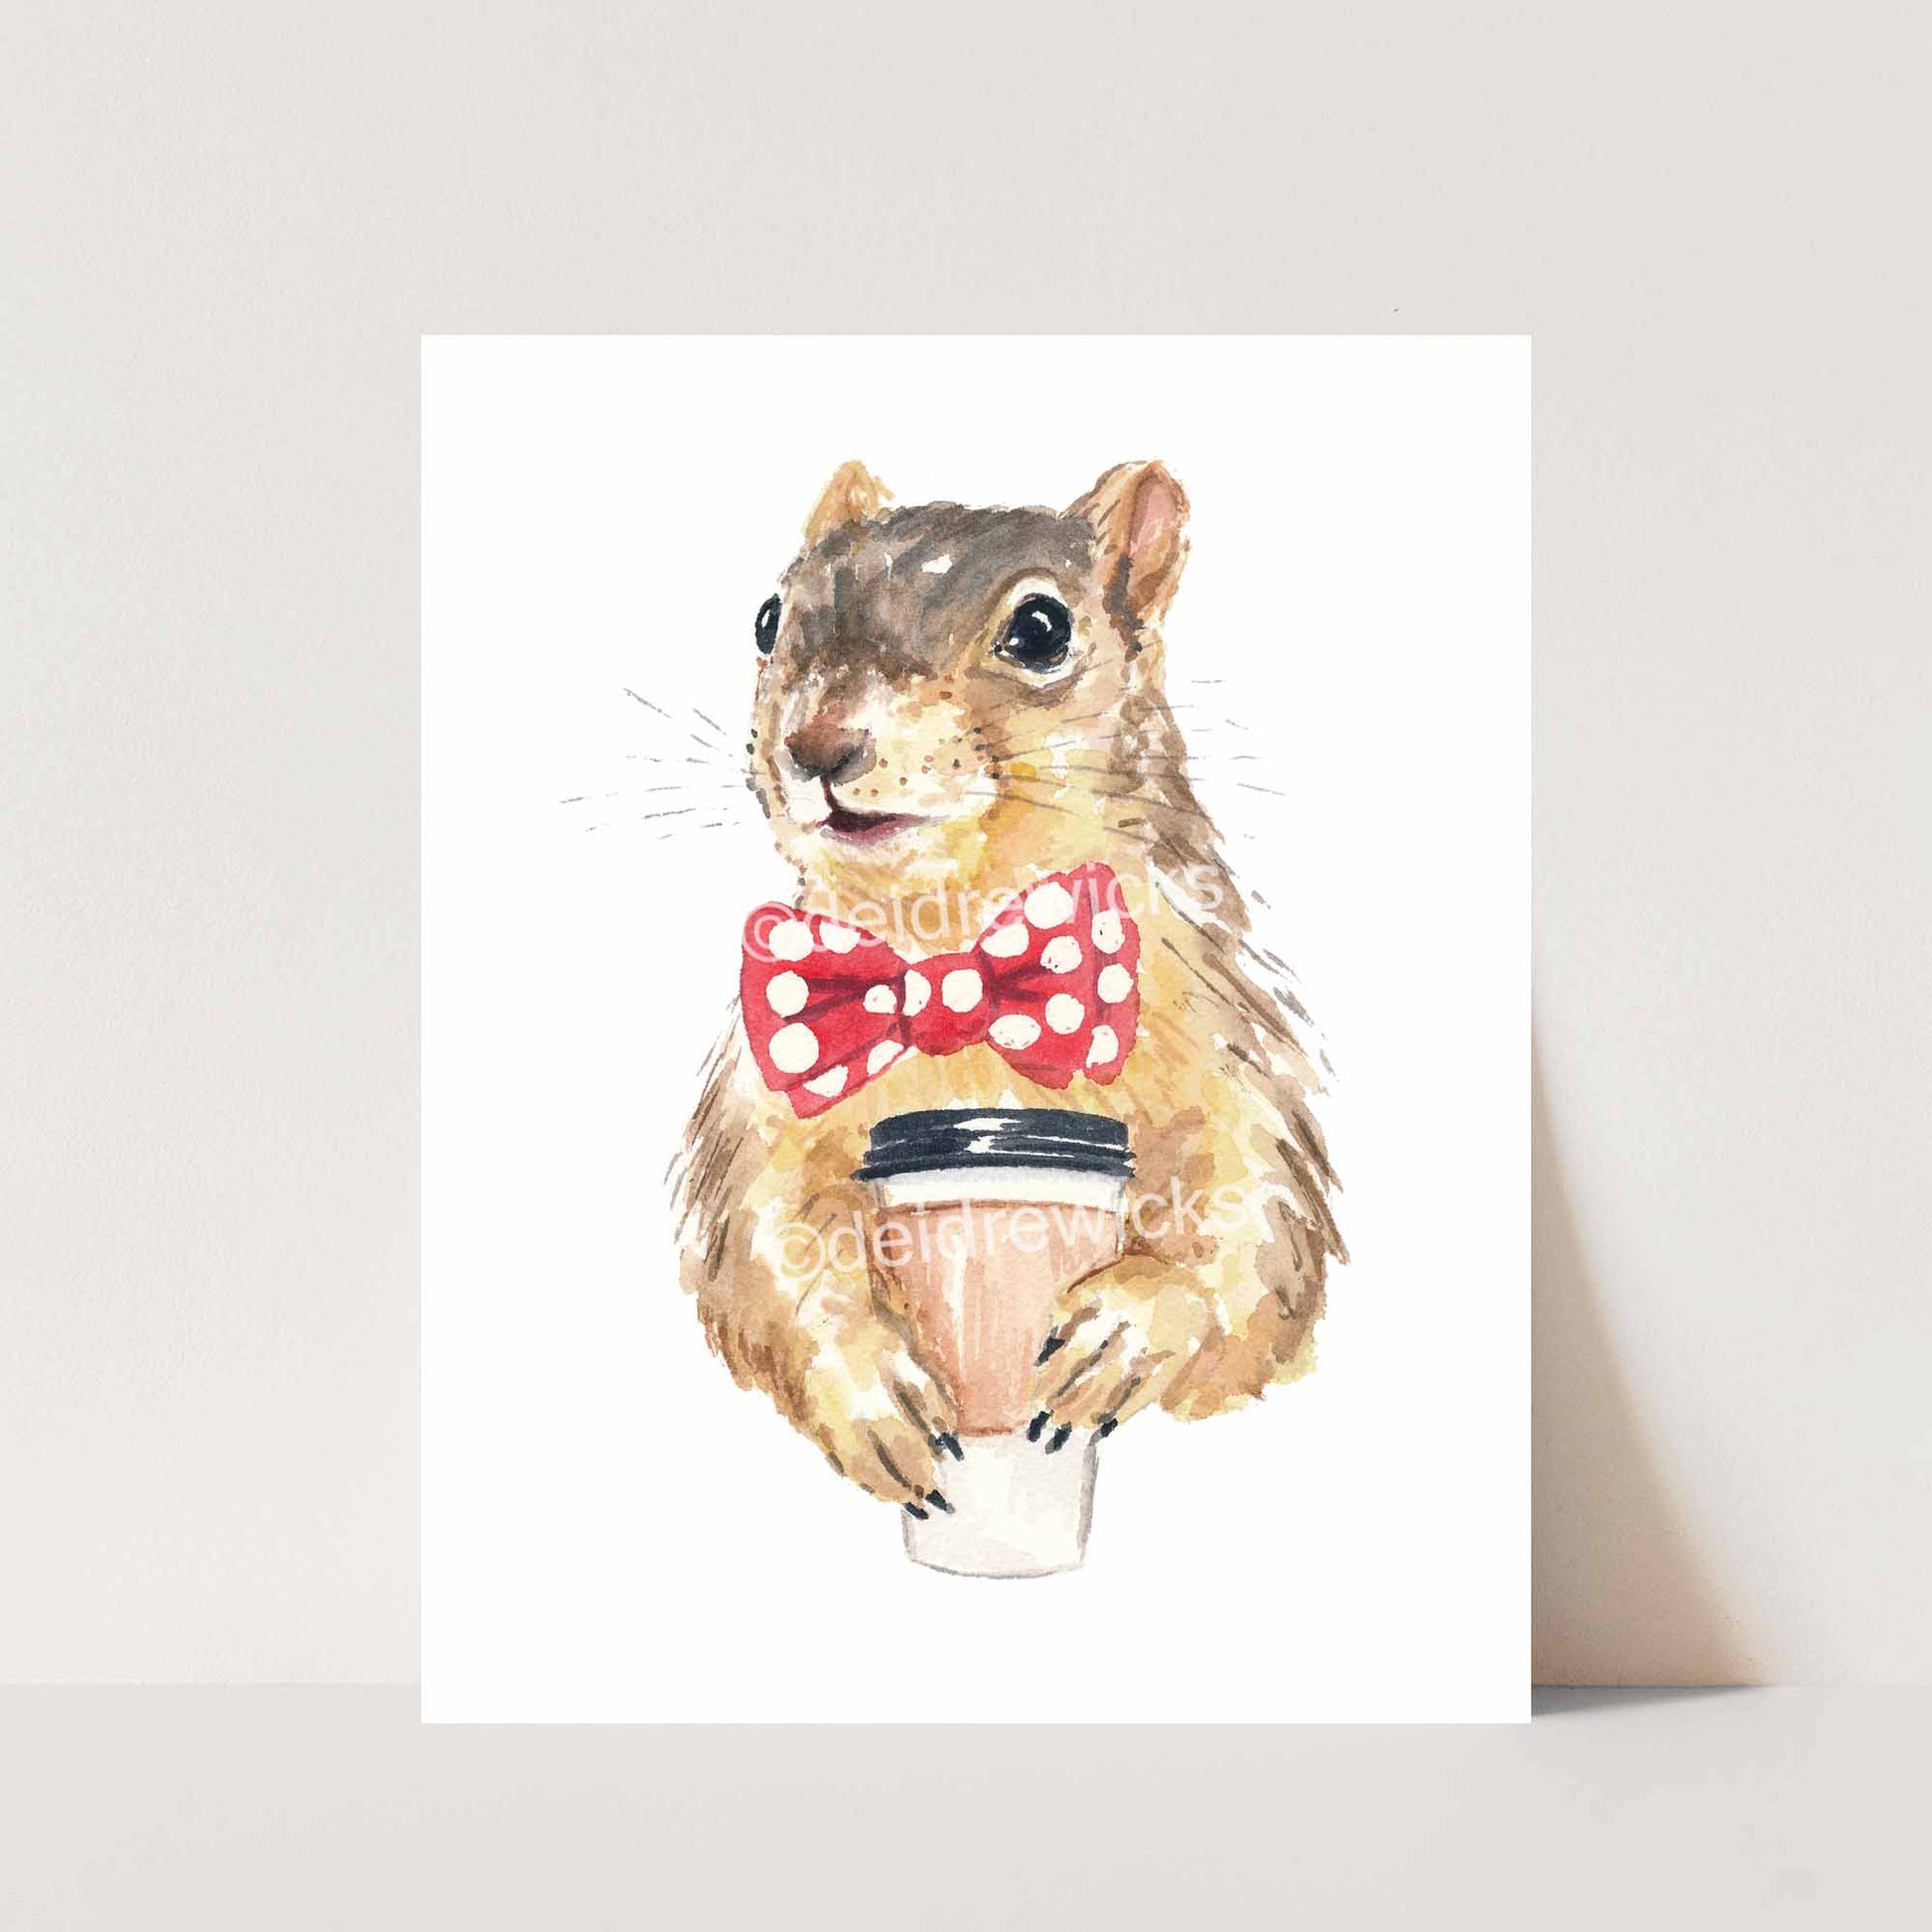 8x10 watercolour print of a squirrel holding a take out cup of coffee by Deidre Wicks